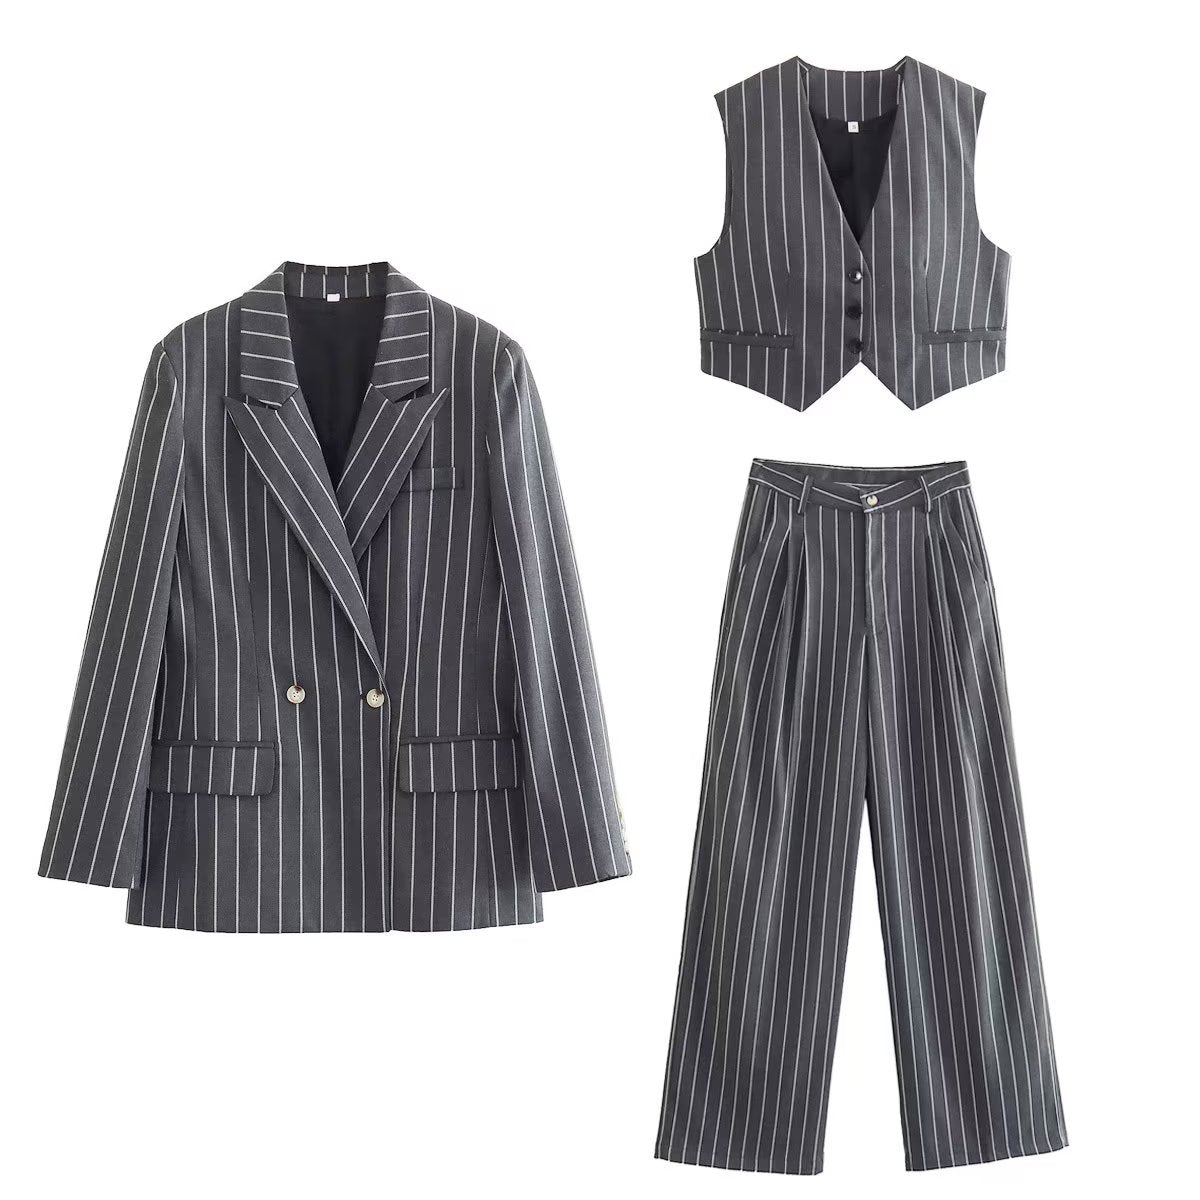 2023 Fashion Trends | Old Money Aesthetic Striped Blazer Vest Pants Outfit 3-piece outfit